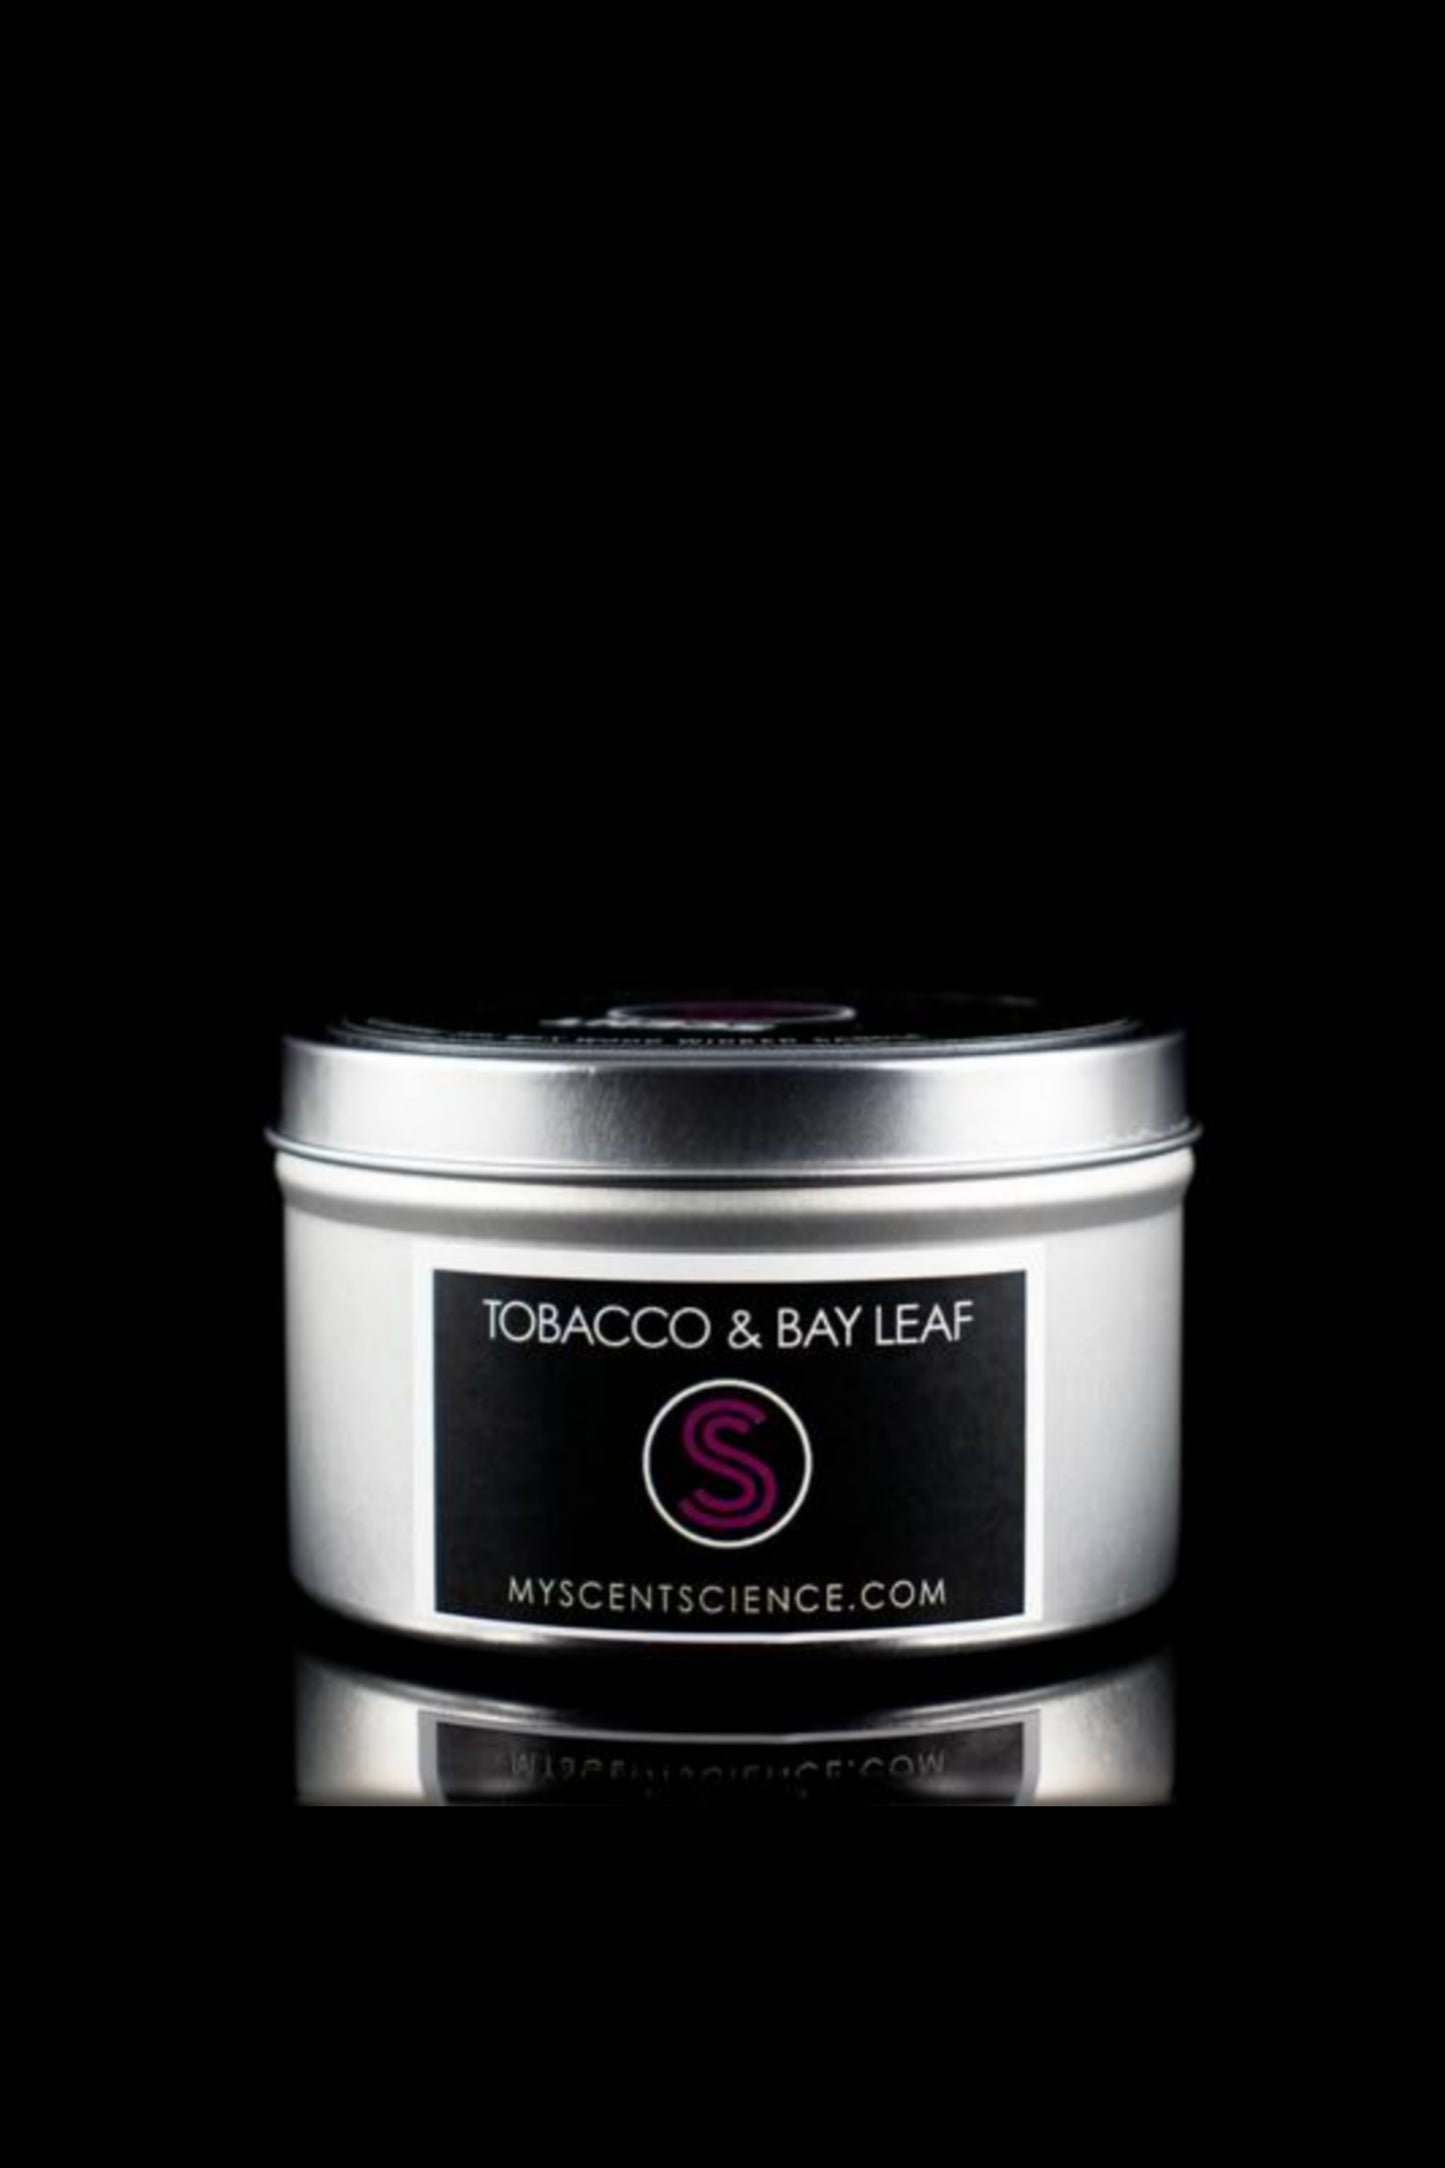 Tobacco and Bay Leaf Travel Tin Candle